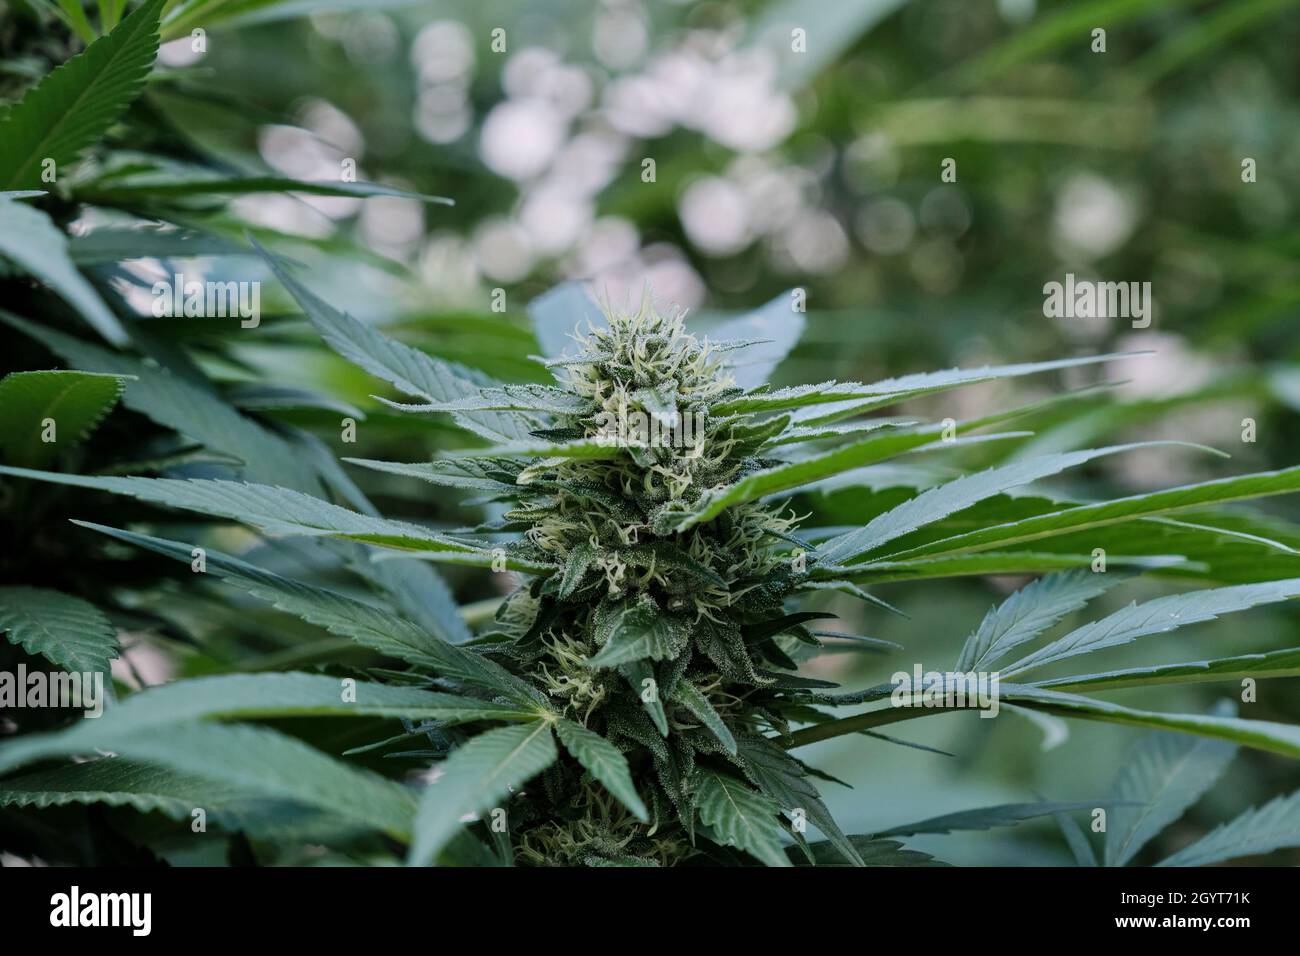 Cannabis sativa plant female flowers blooming close up Stock Photo